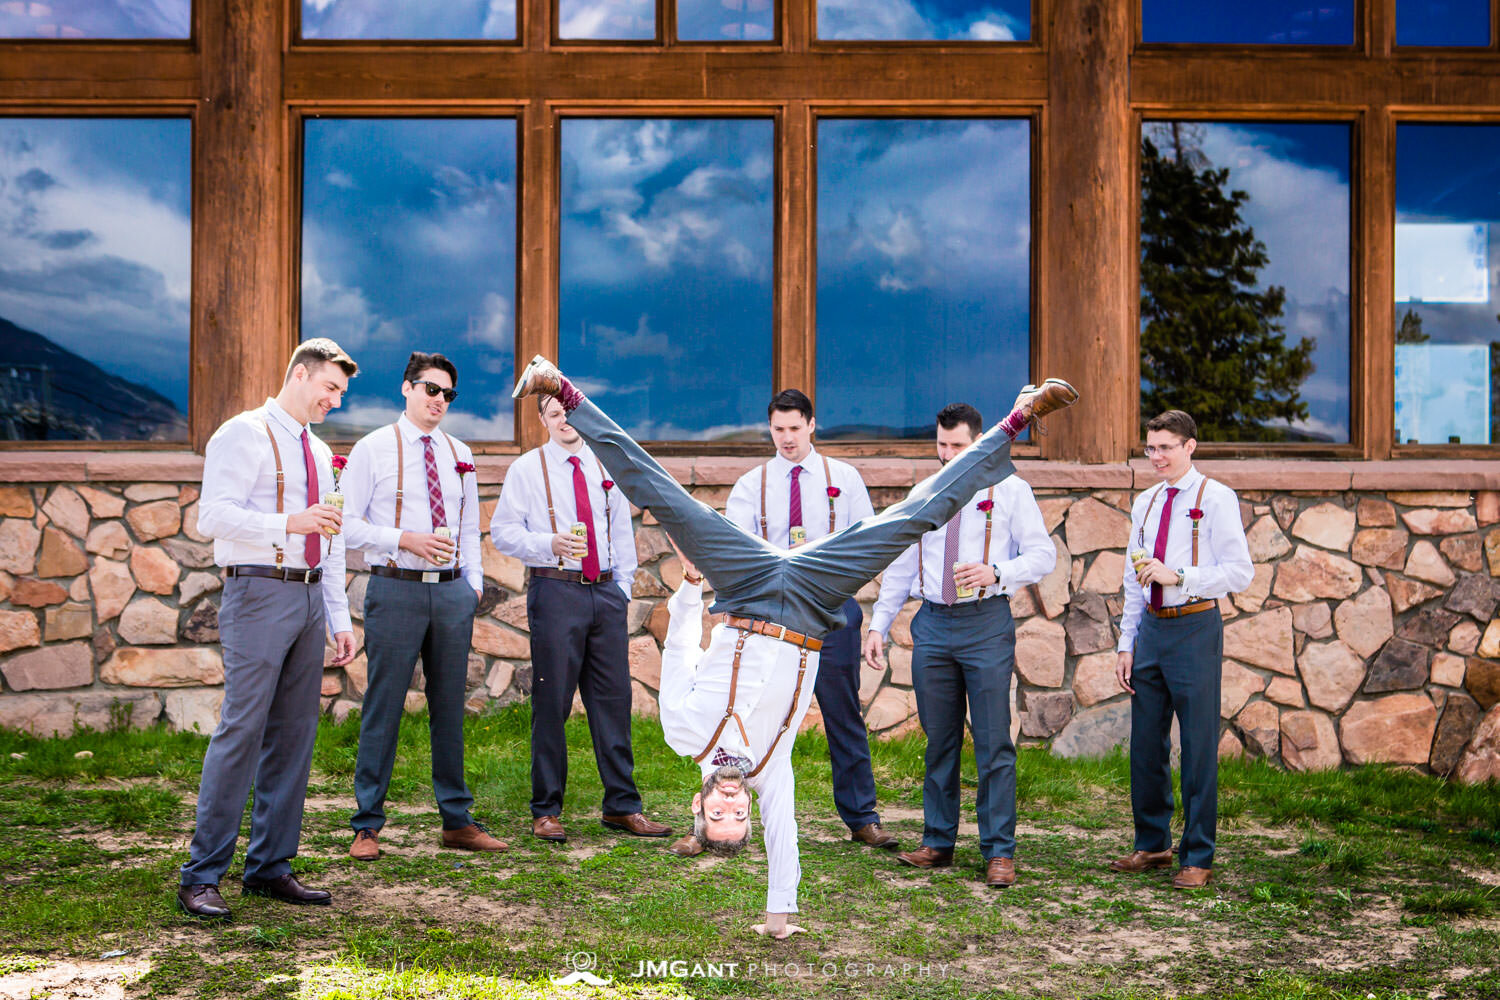  Groom doing a handstand! Wedding party photos at Winter Park, mountain wedding at the Lodge at Sunspot, photographed by JMGant Photography 